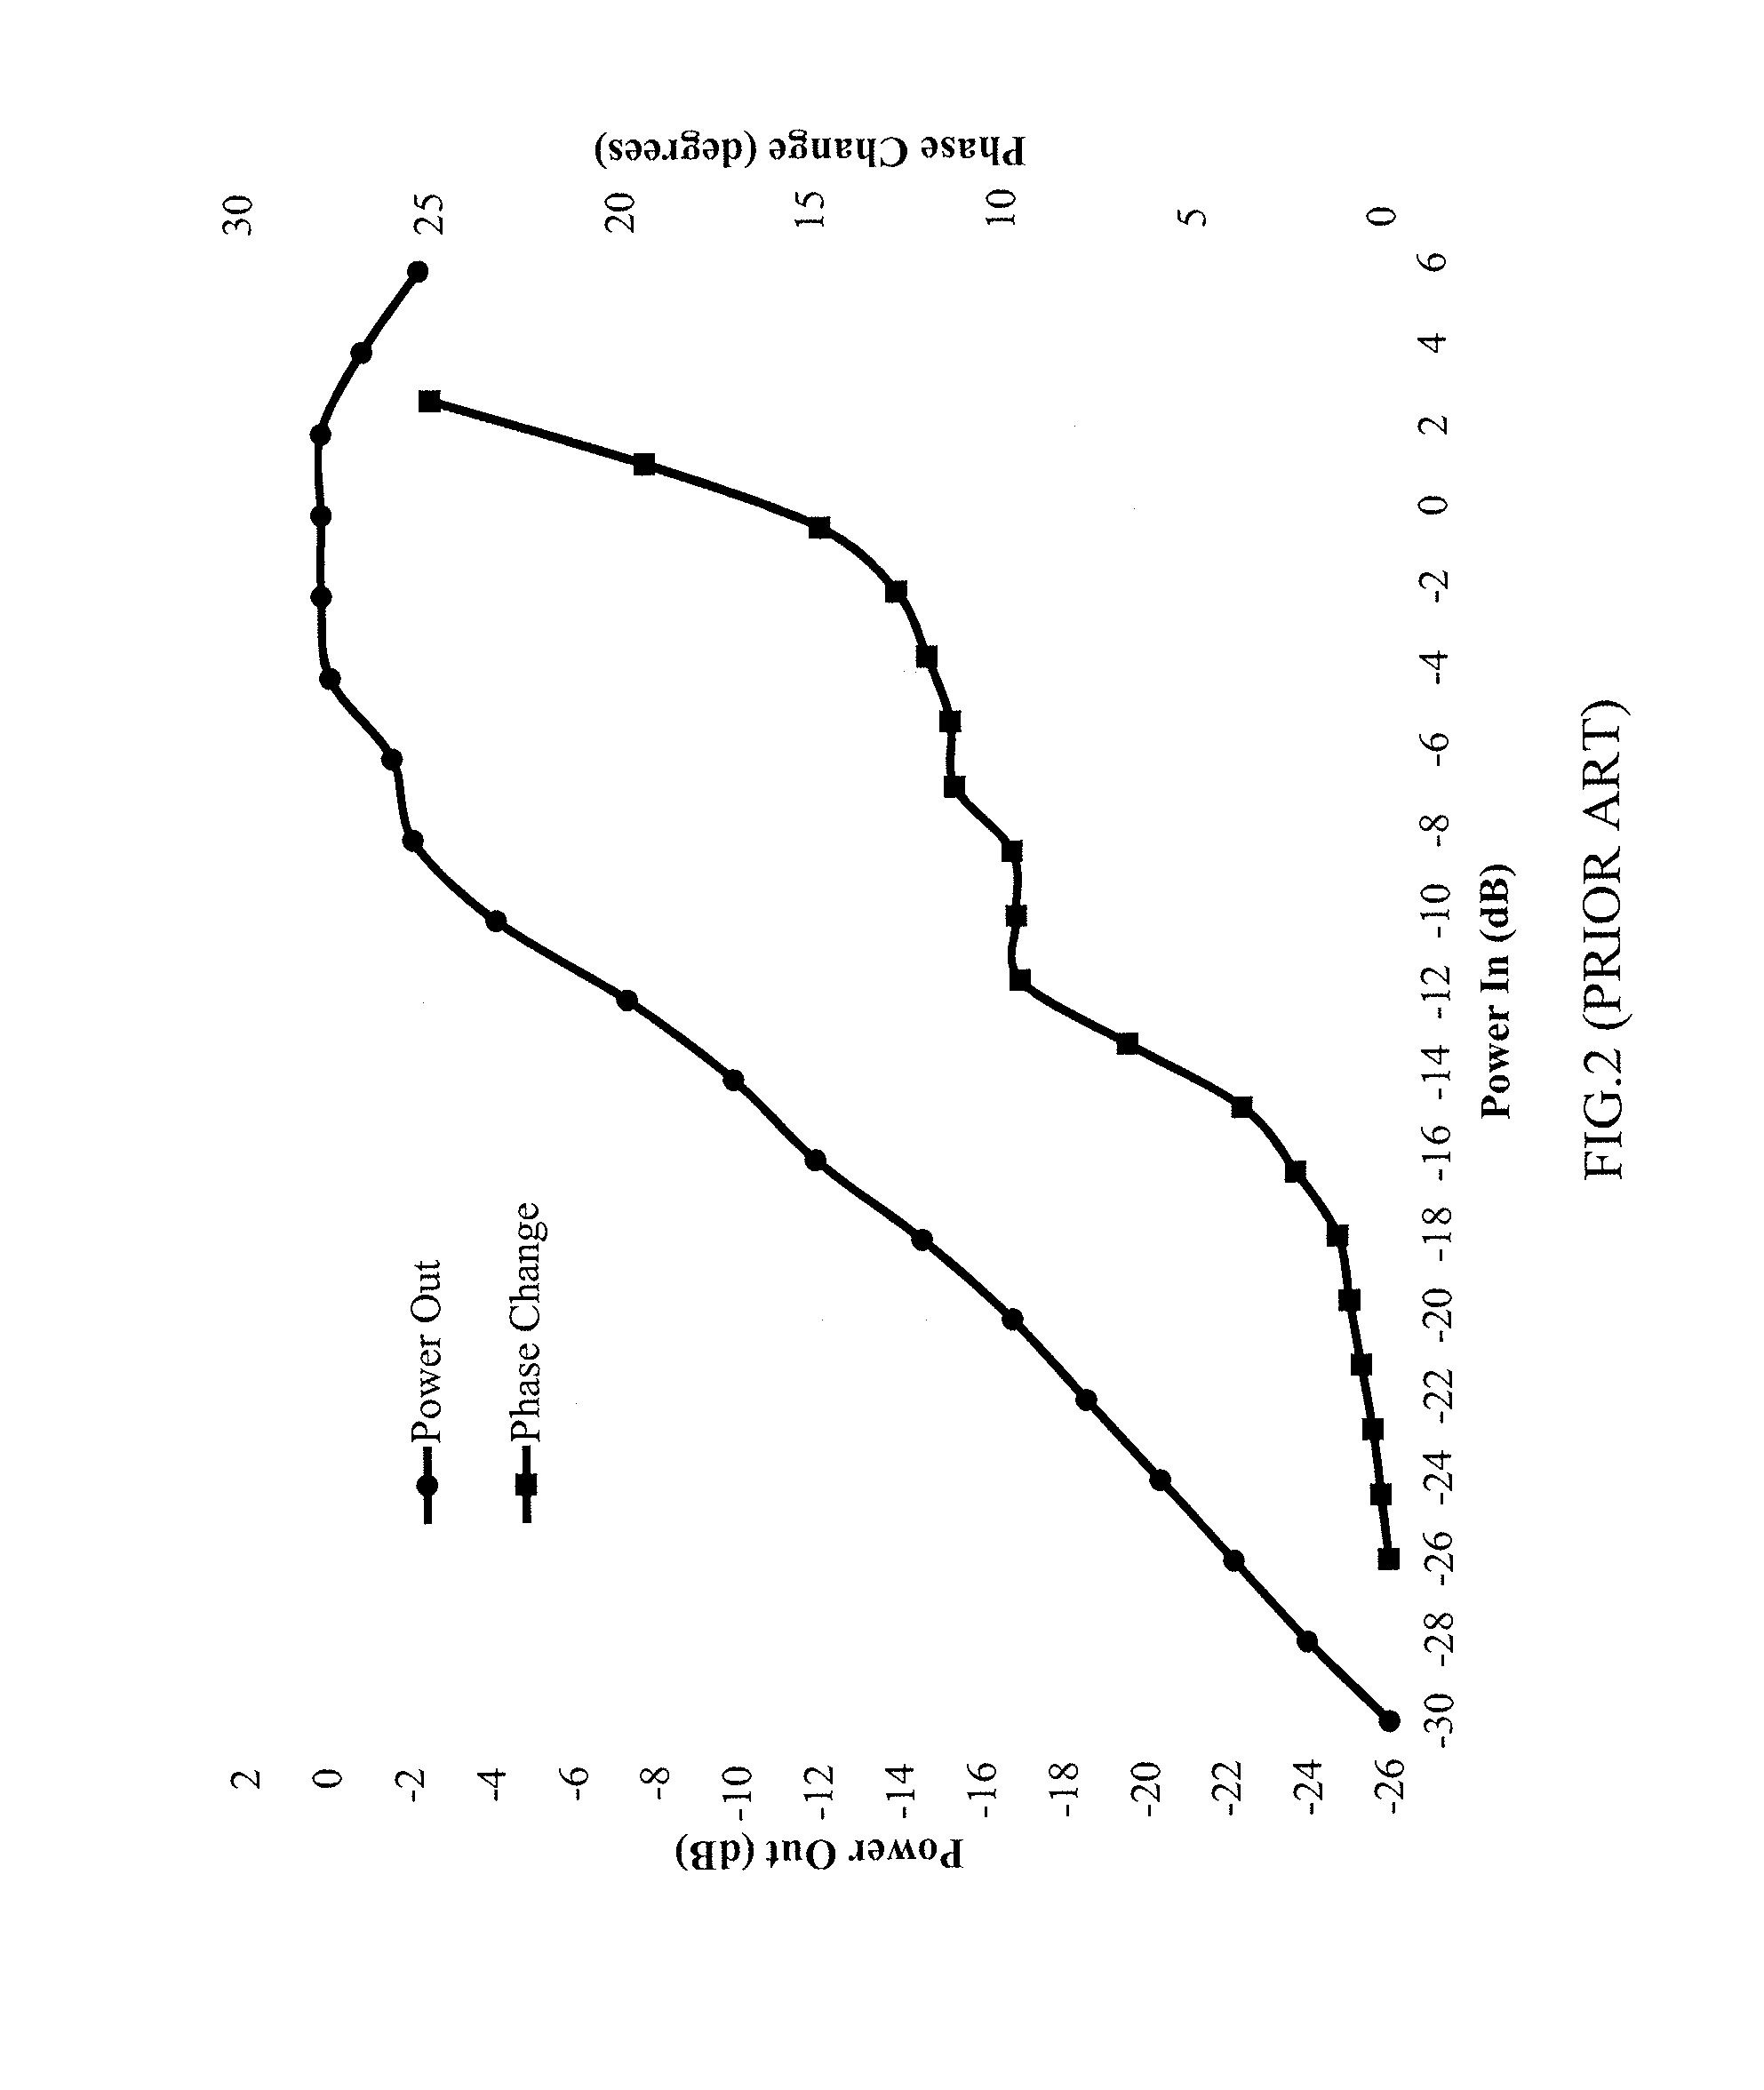 Method and apparatus for demodulation of a desired signal by constellation-independent cancellation of nonlinear-distorted interference